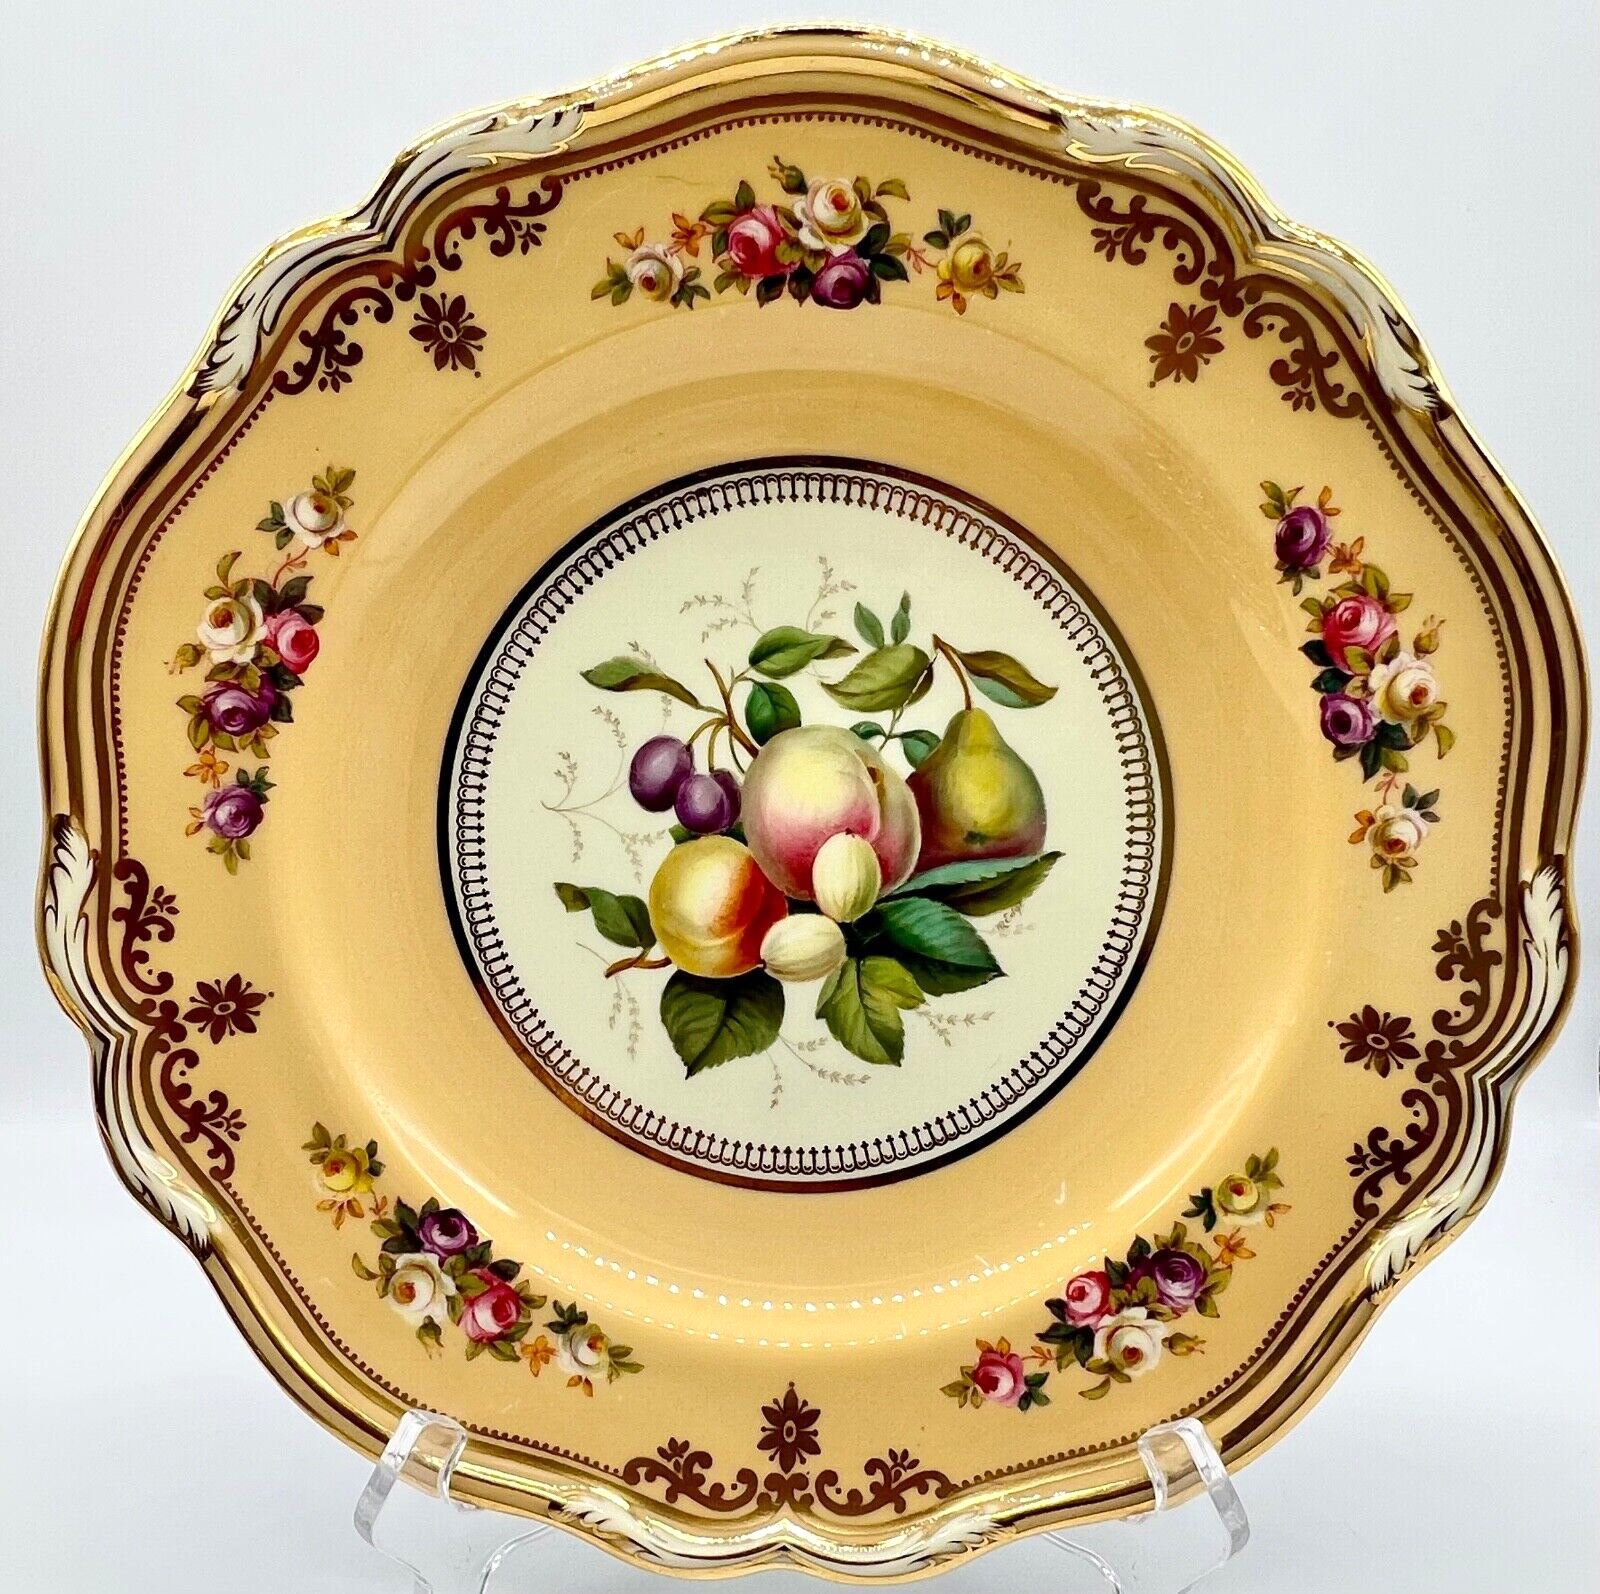 RARE & BEAUTIFUL c1891 SPODE COPELAND CABINET PLATE, FRUITS, ROSES; Y947